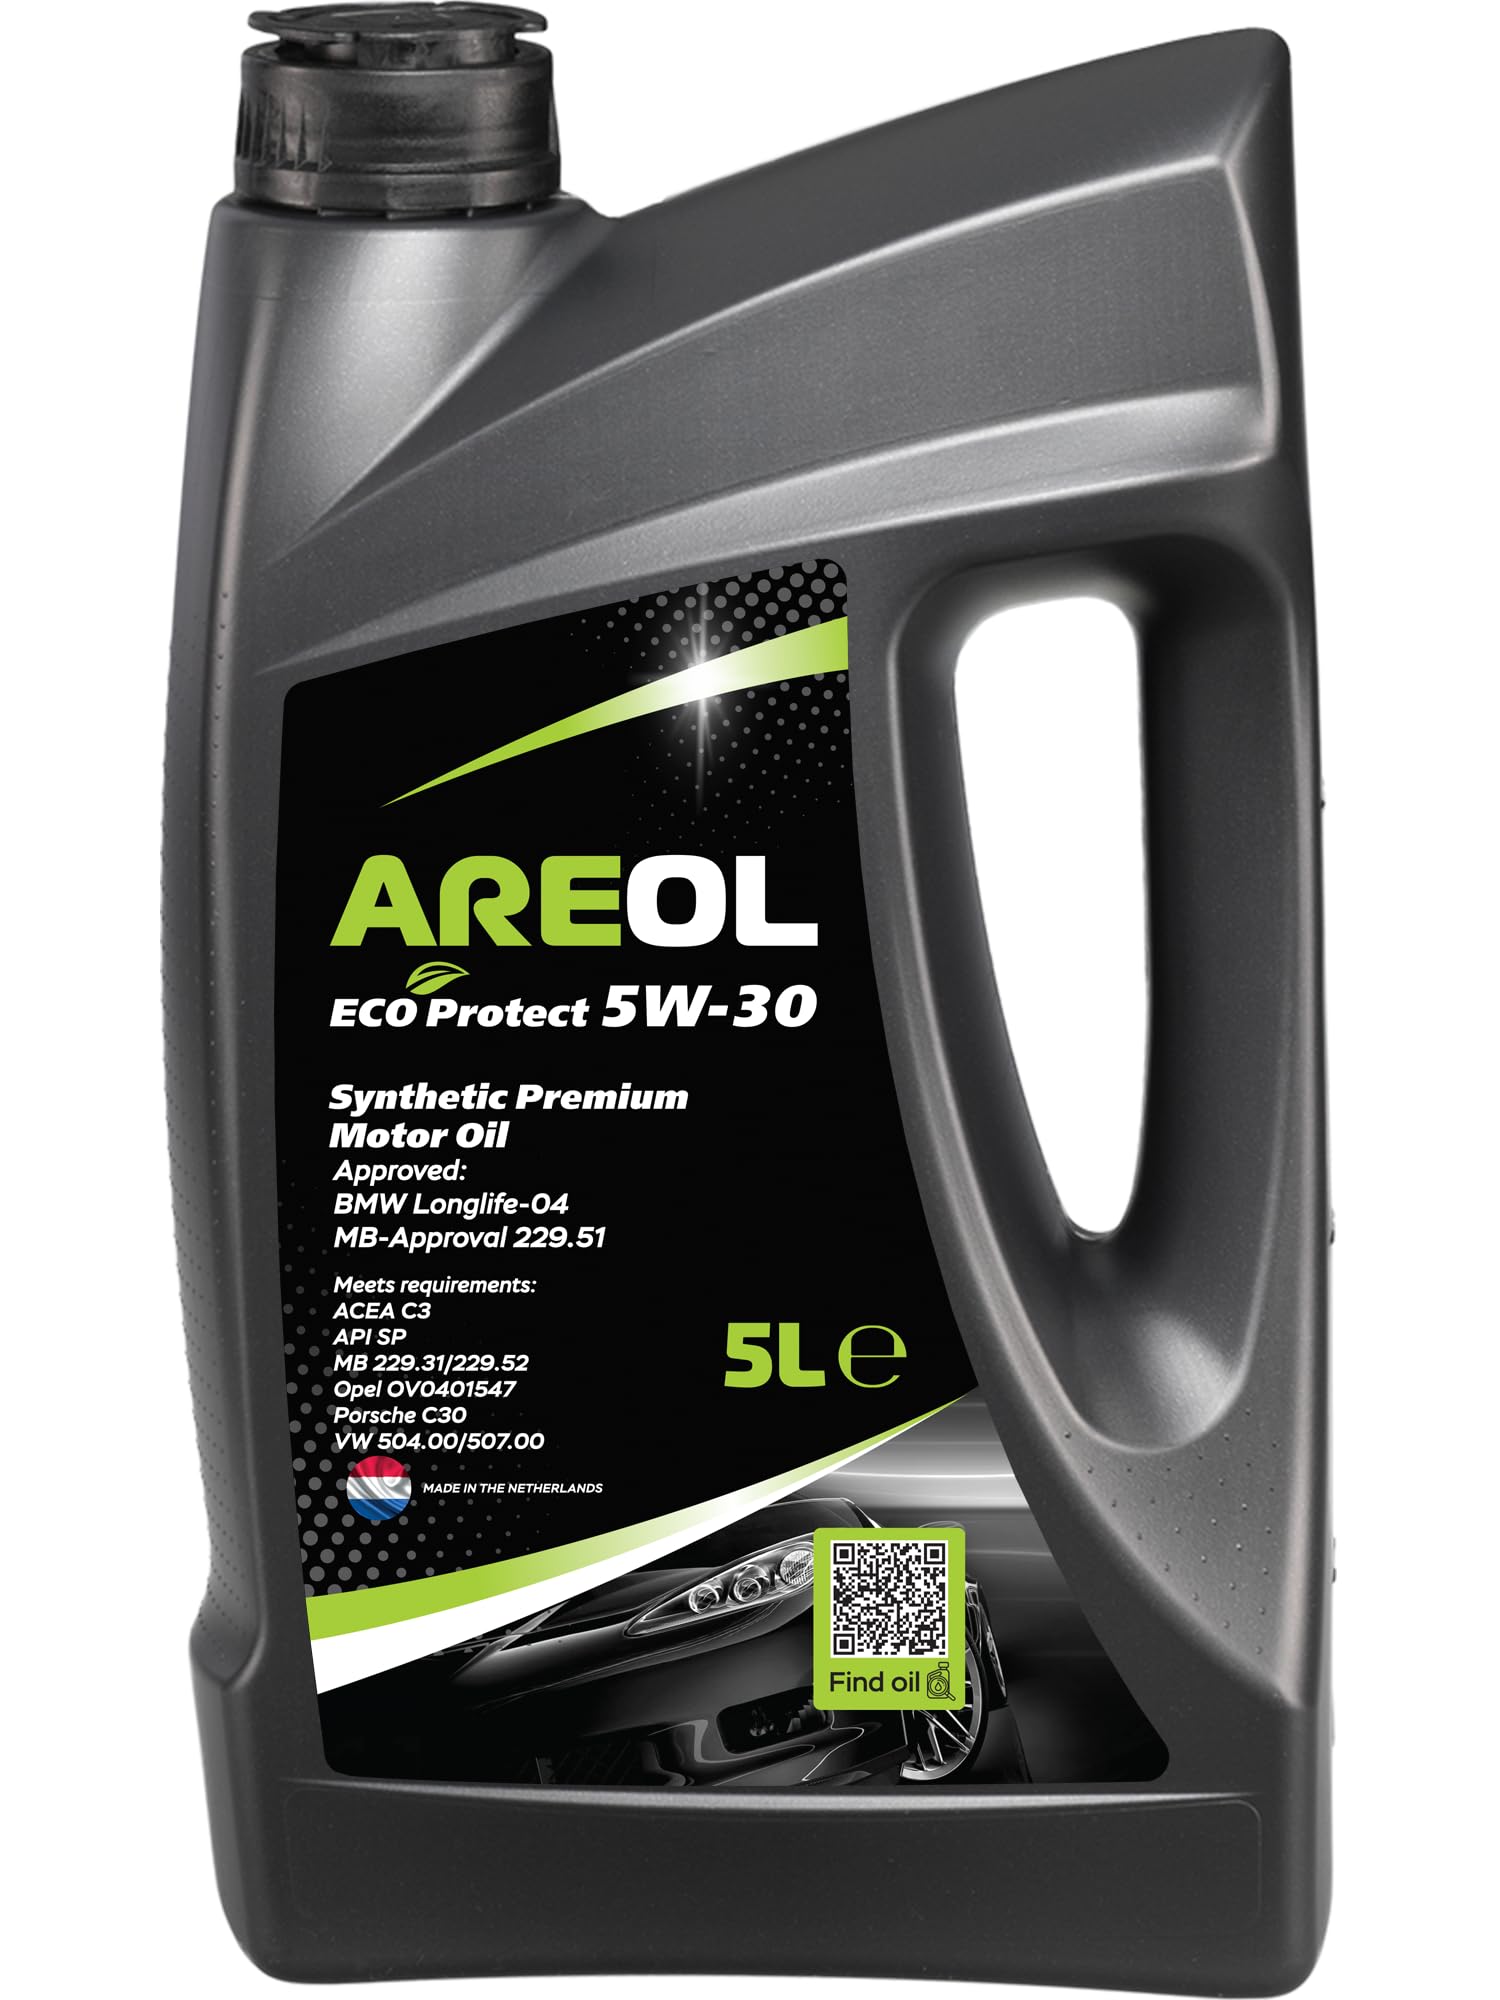 AREOL ECO Protect 5W-30 Motoröl, 5 Liter von AREOL